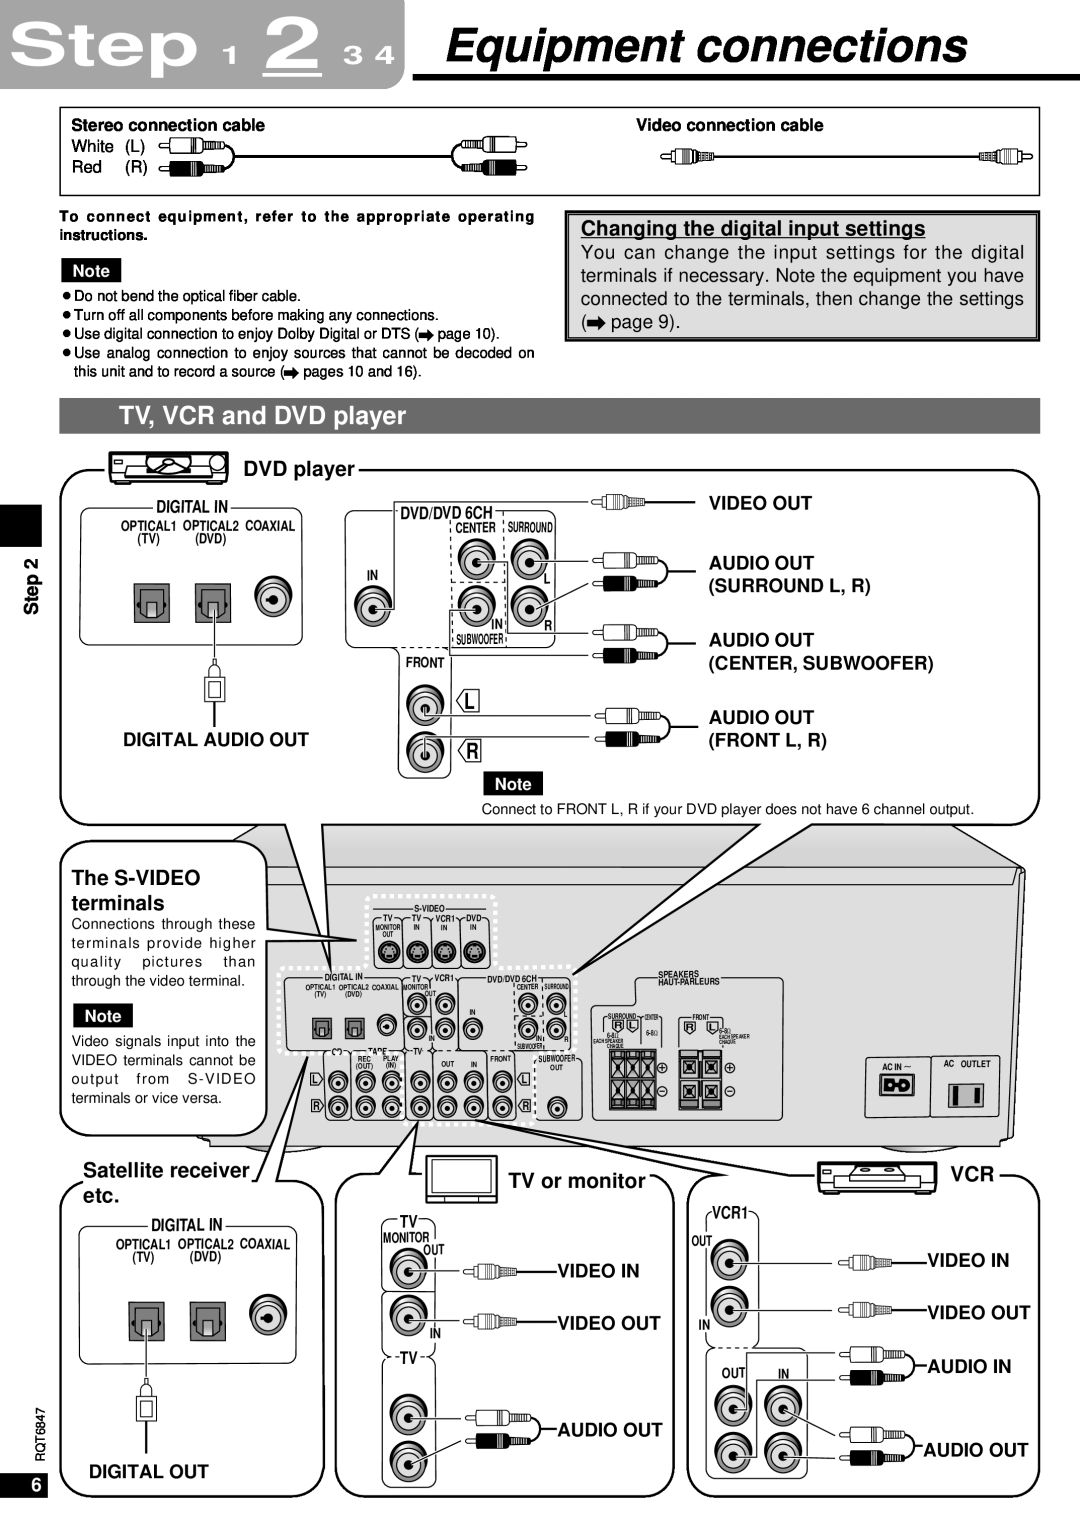 Panasonic SA-HE75 Equipment connections, TV, VCR and DVD player, Step, Changing the digital input settings, TV or monitor 